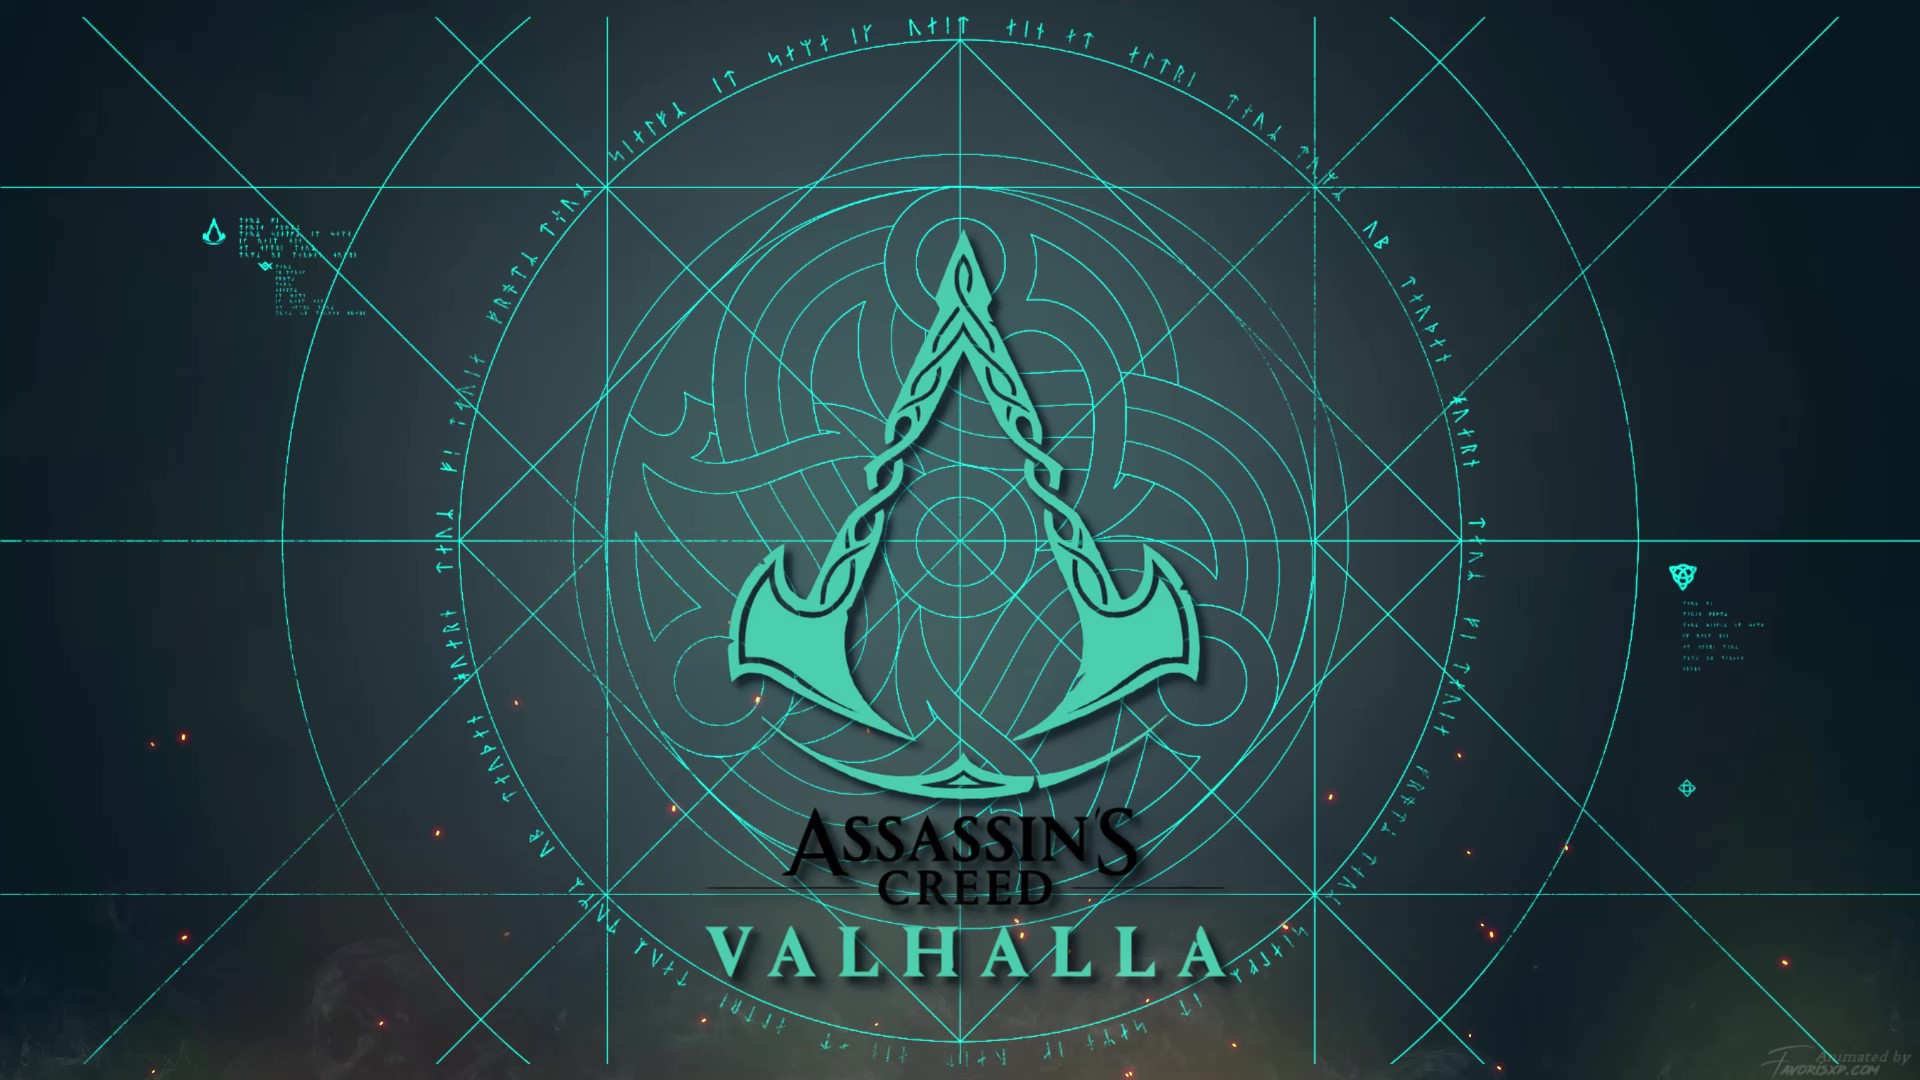 Valhalla Assassin's Creed Wallpapers